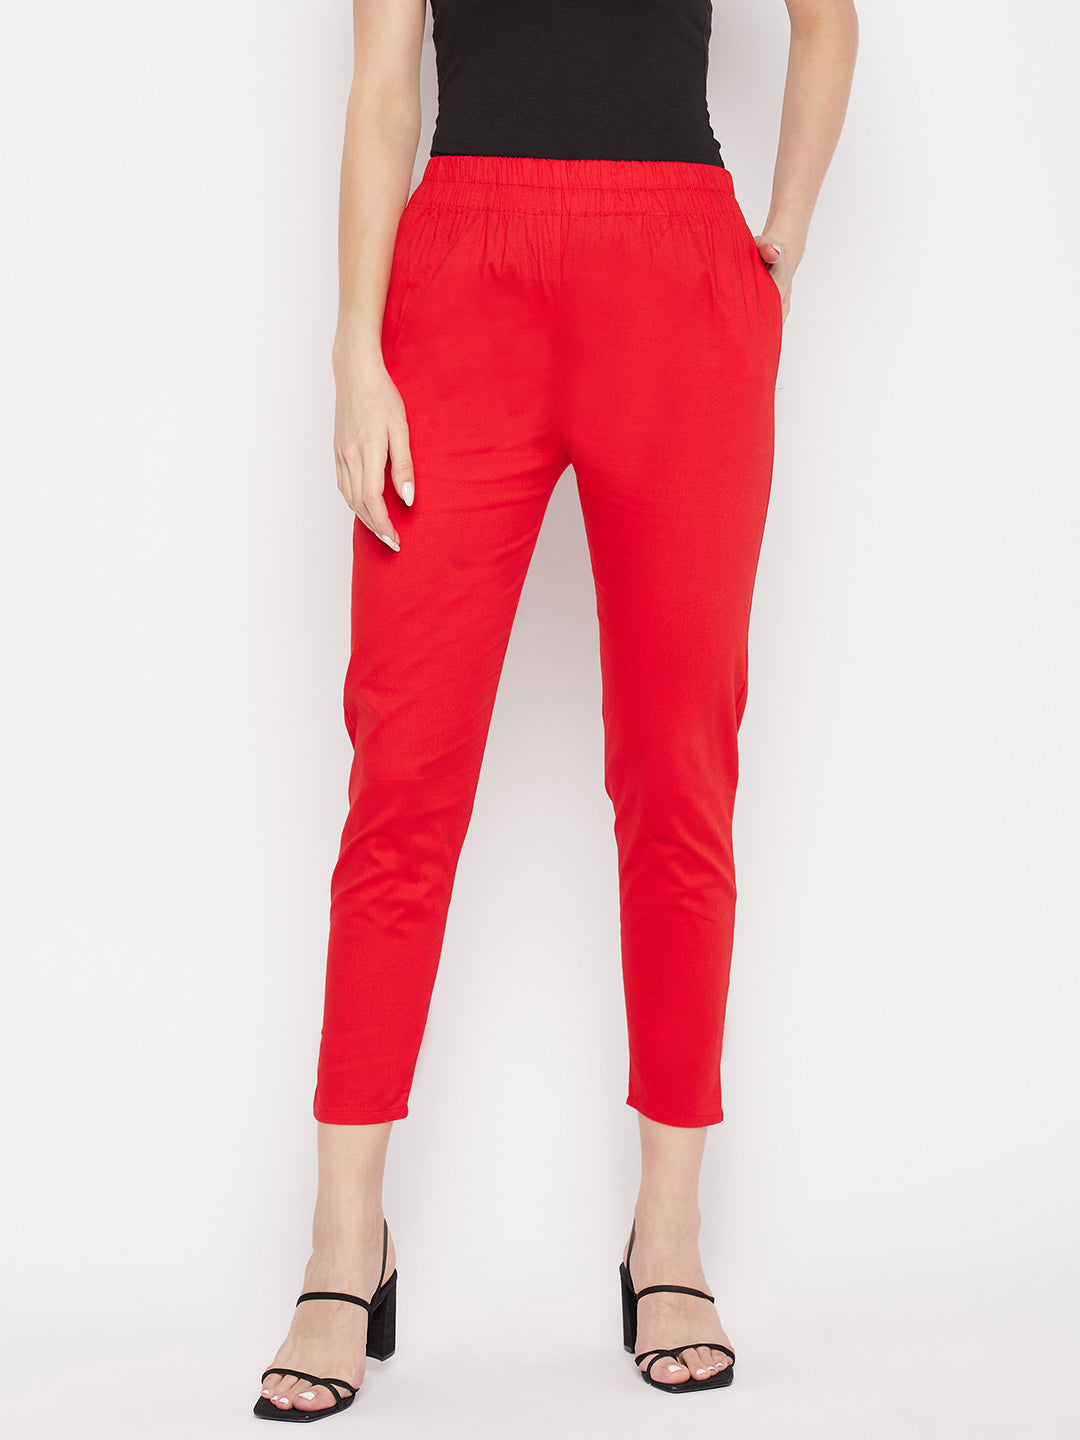 Clora Red Solid Cotton Lycra Pant